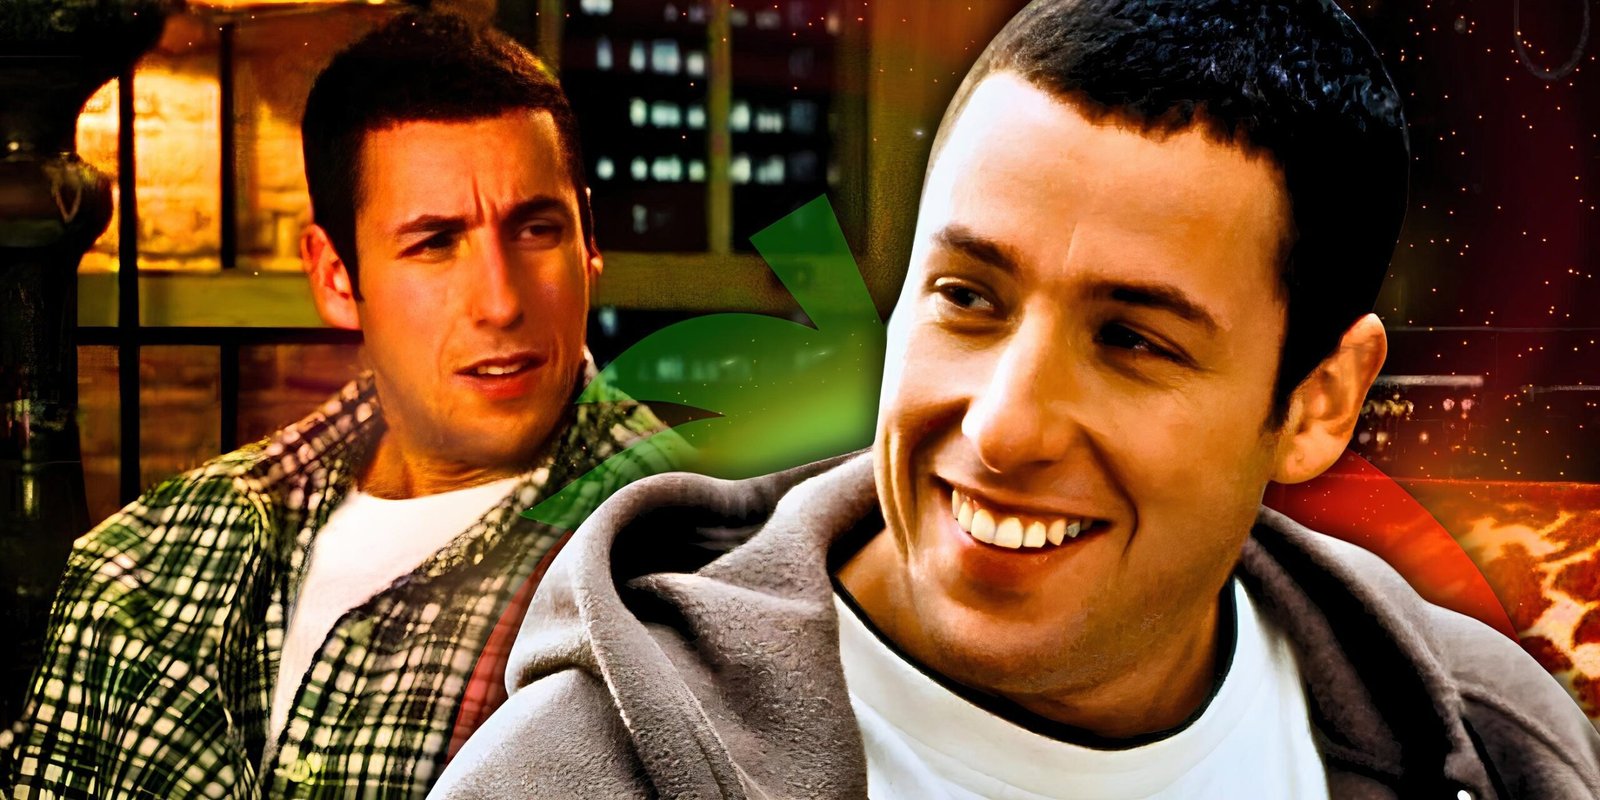 One Of Adam Sandler's Best Comedies Is Now On Netflix & I'm Shocked By Its 39% RT Score